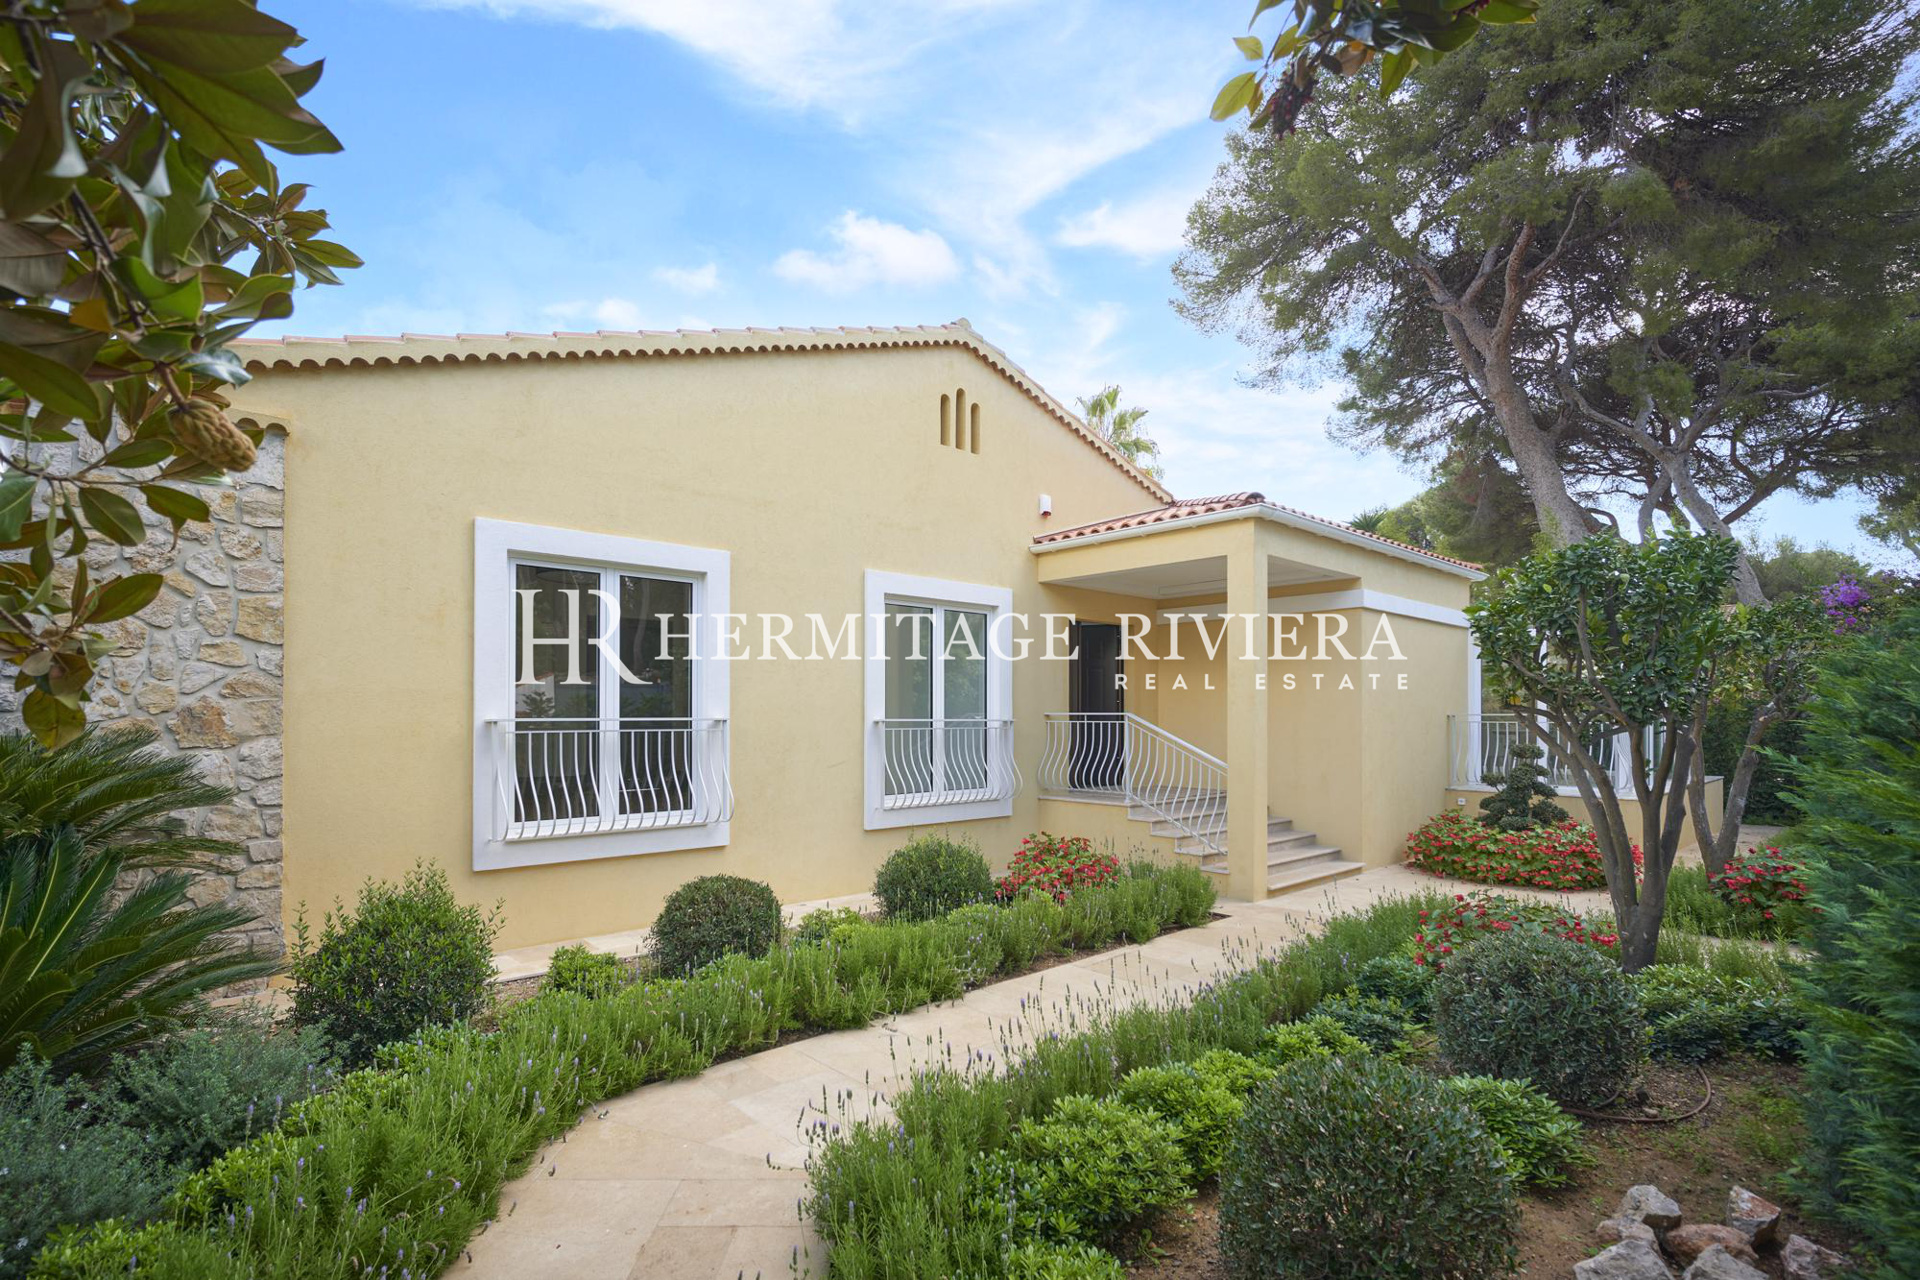 Beautifully appointed villa offering views of the sea and Italian coast (image 5)